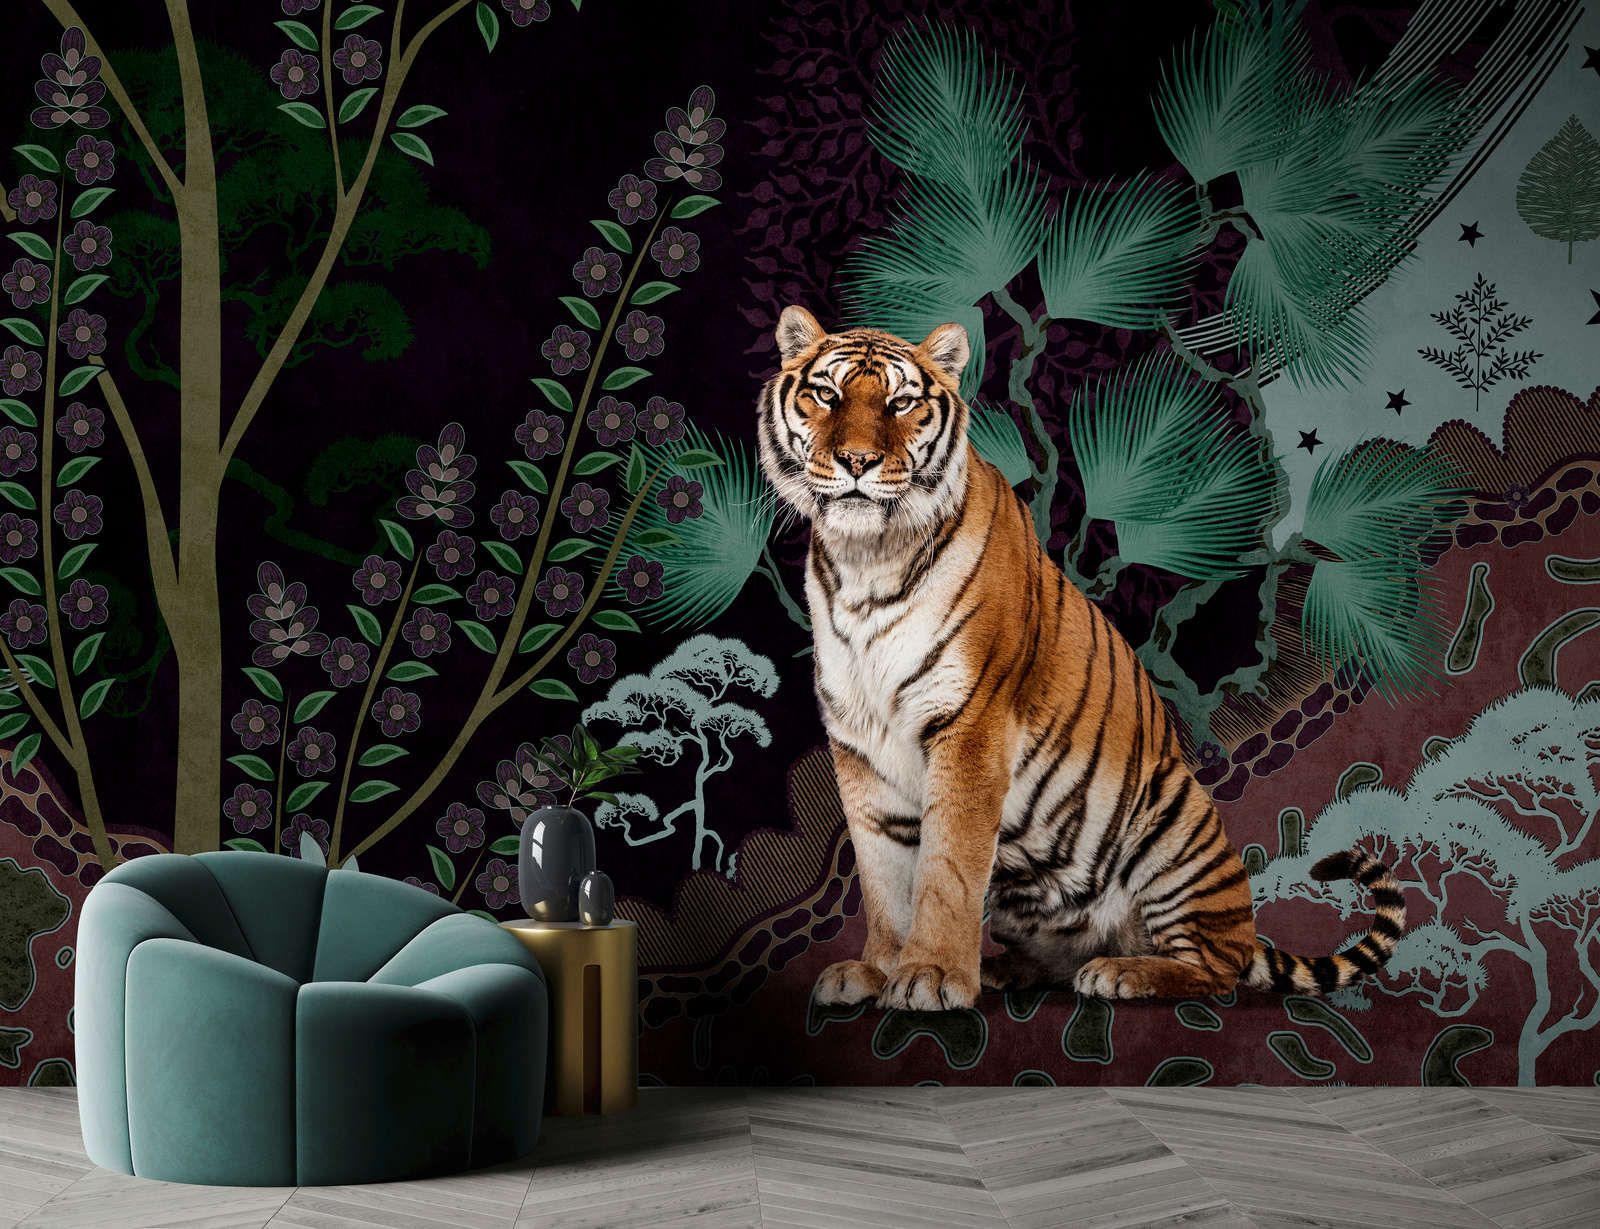             Photo wallpaper »khan« - Abstract jungle motif with tiger - Smooth, slightly shiny premium non-woven fabric
        